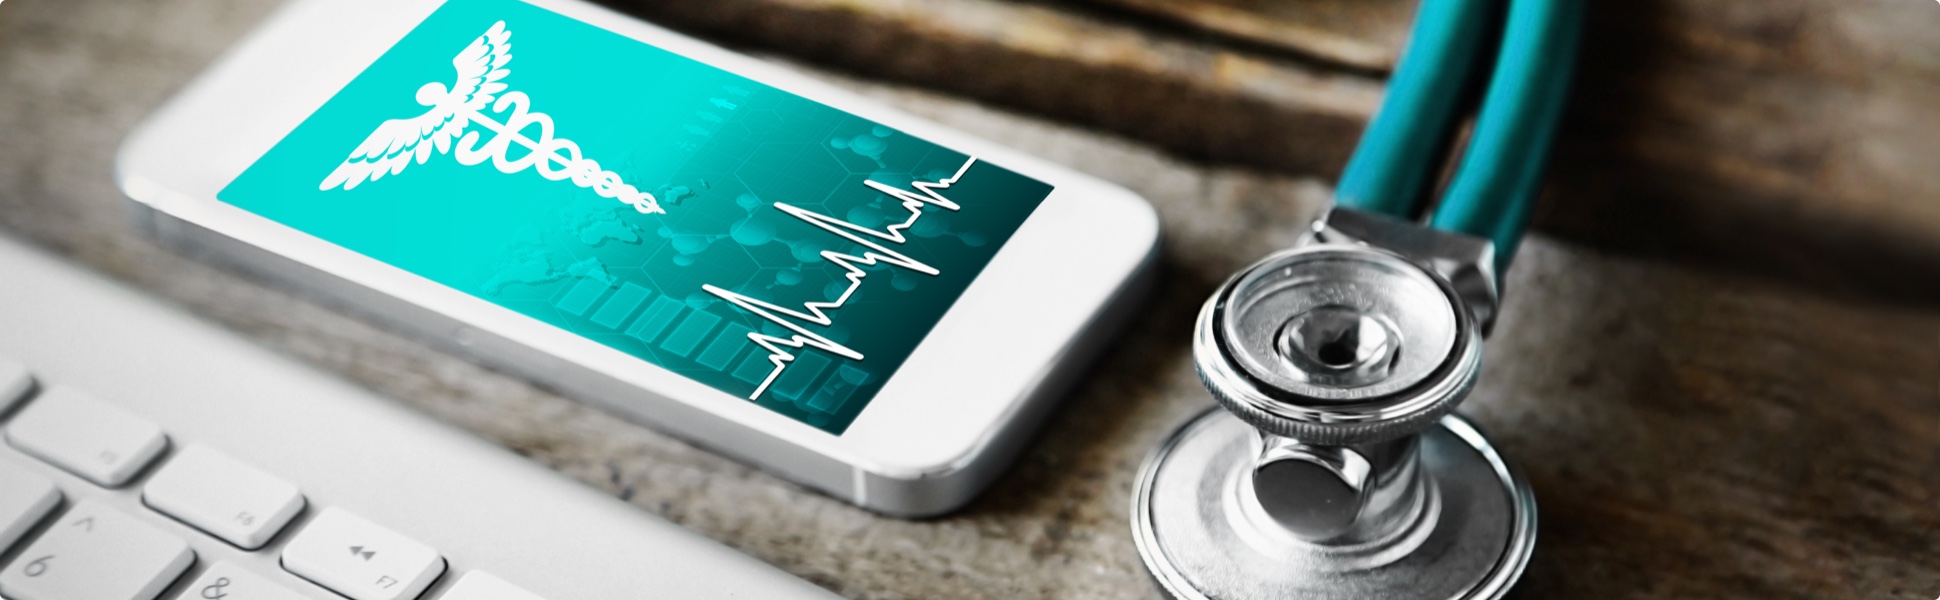 Technology and Patient Care: 3 Ways Technology Can Increase Patient Satisfaction